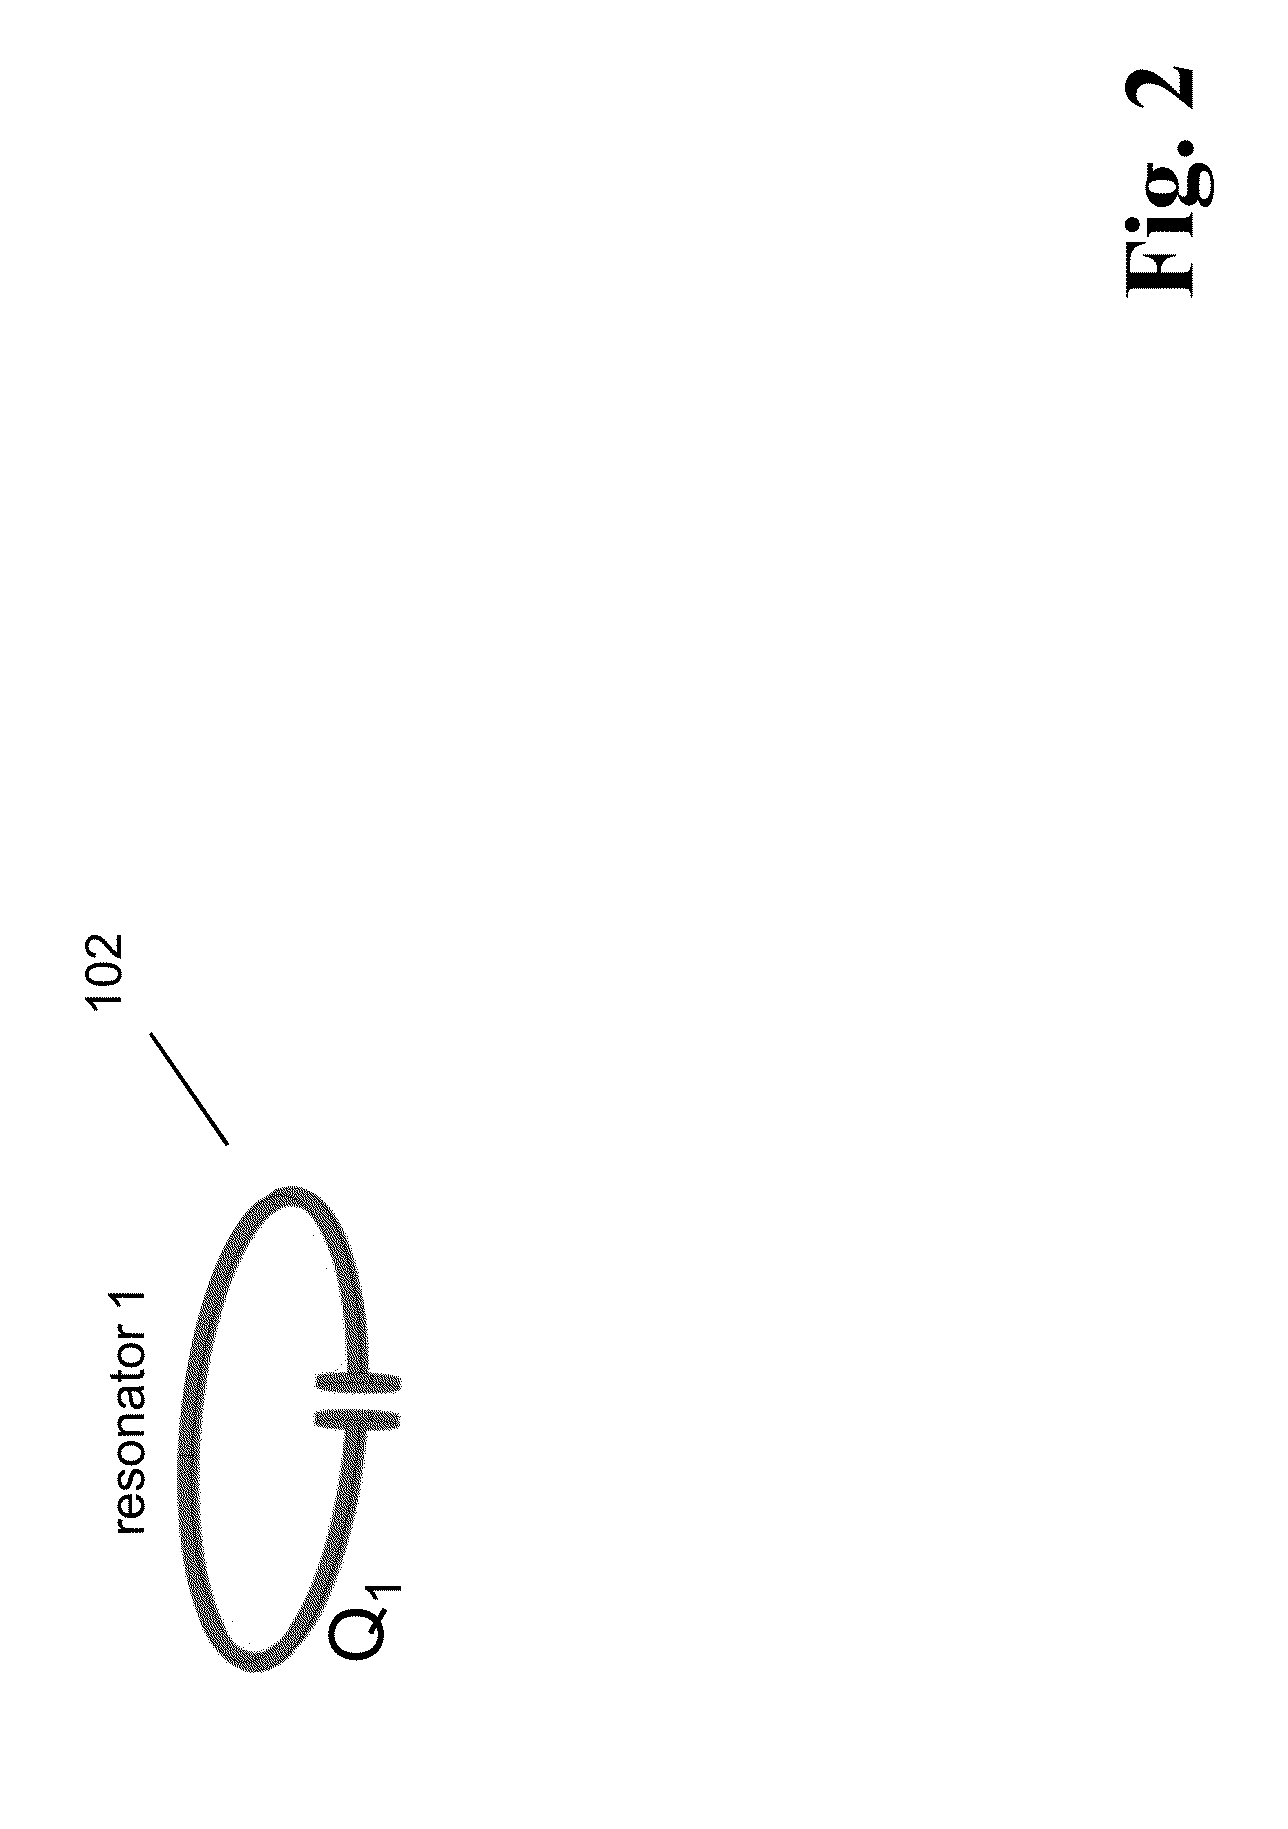 Systems And Methods For Wireless Power System With Improved Performance and/or Ease of Use